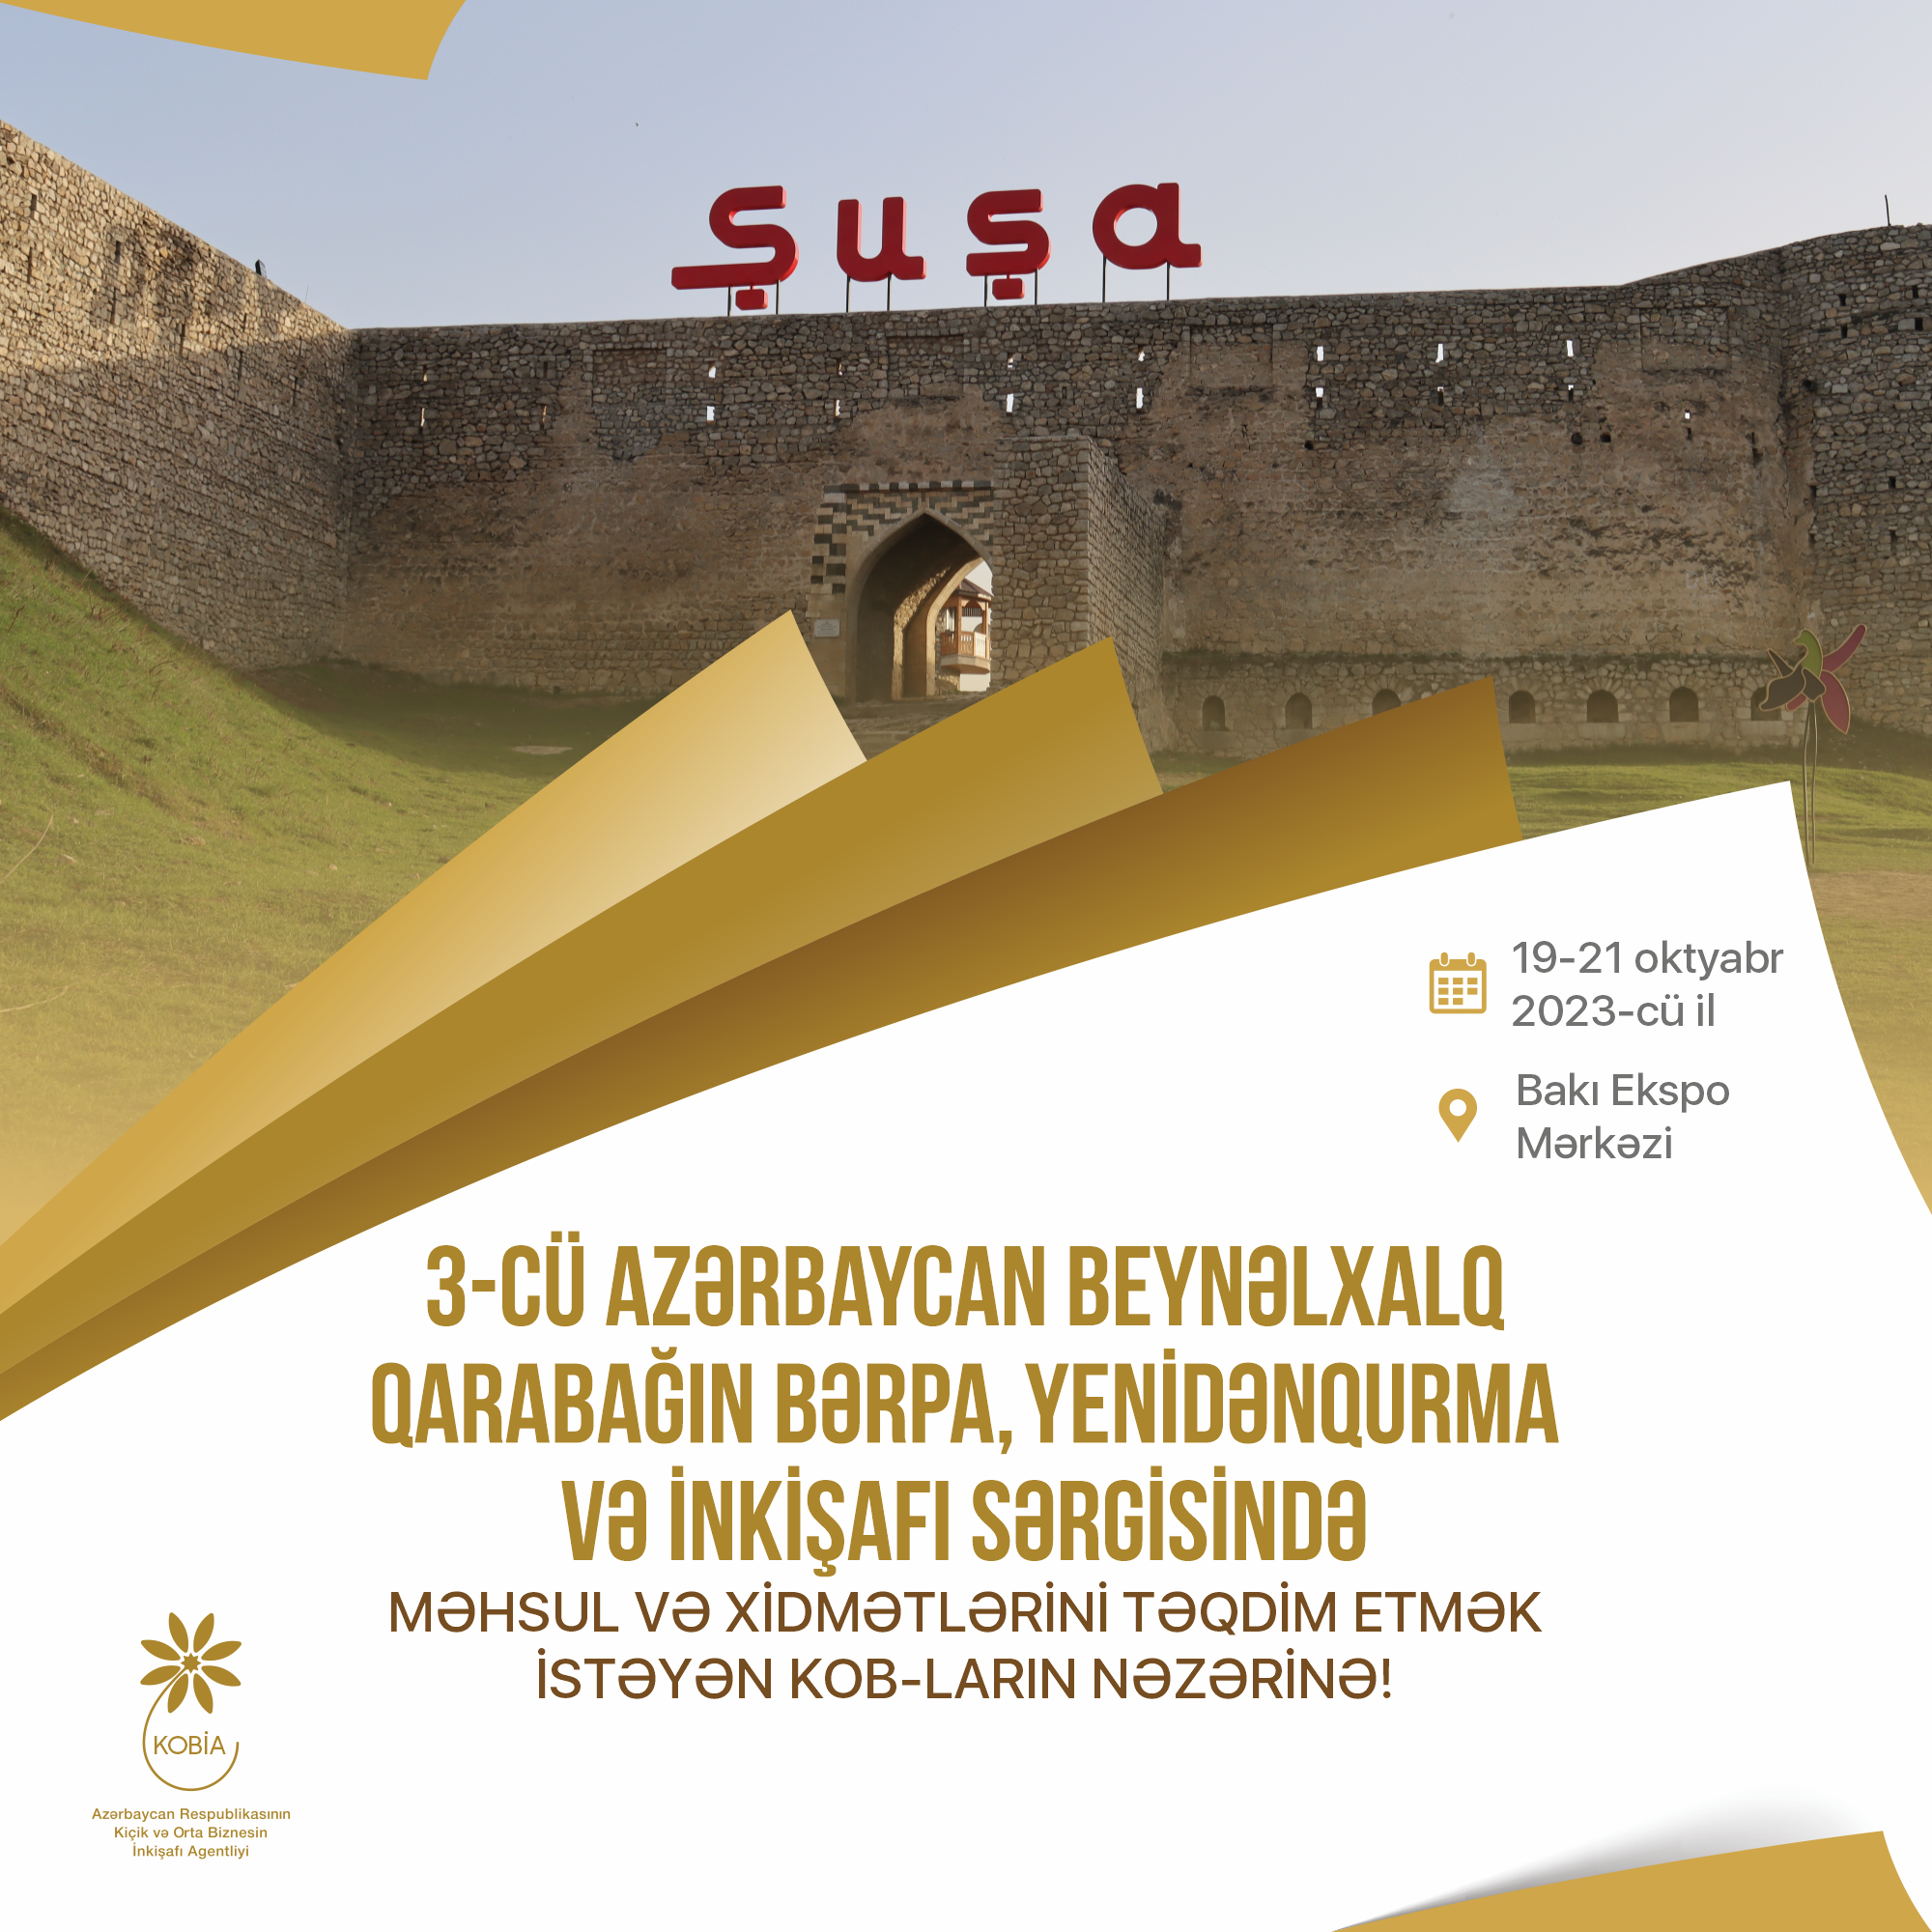 To the attention of SMBs interested in presenting their products and services at the International Restoration, Reconstruction and Development of Karabakh Exhibition!